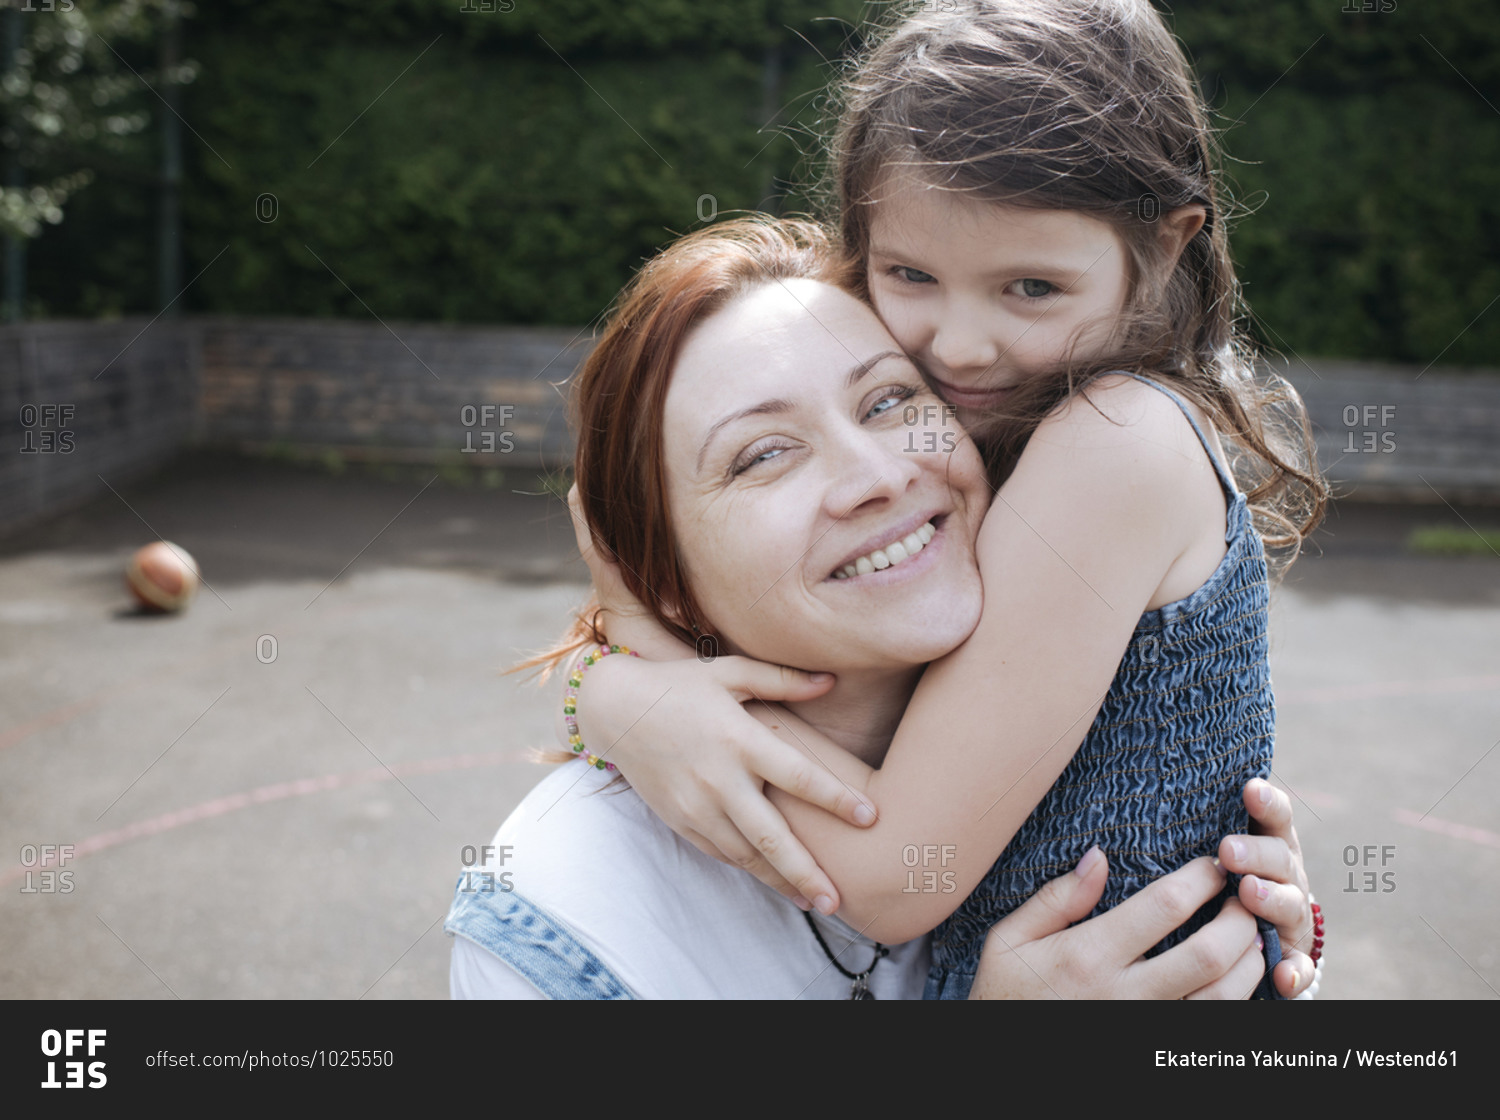 Girl embracing smiling mother at basketball court in back yard